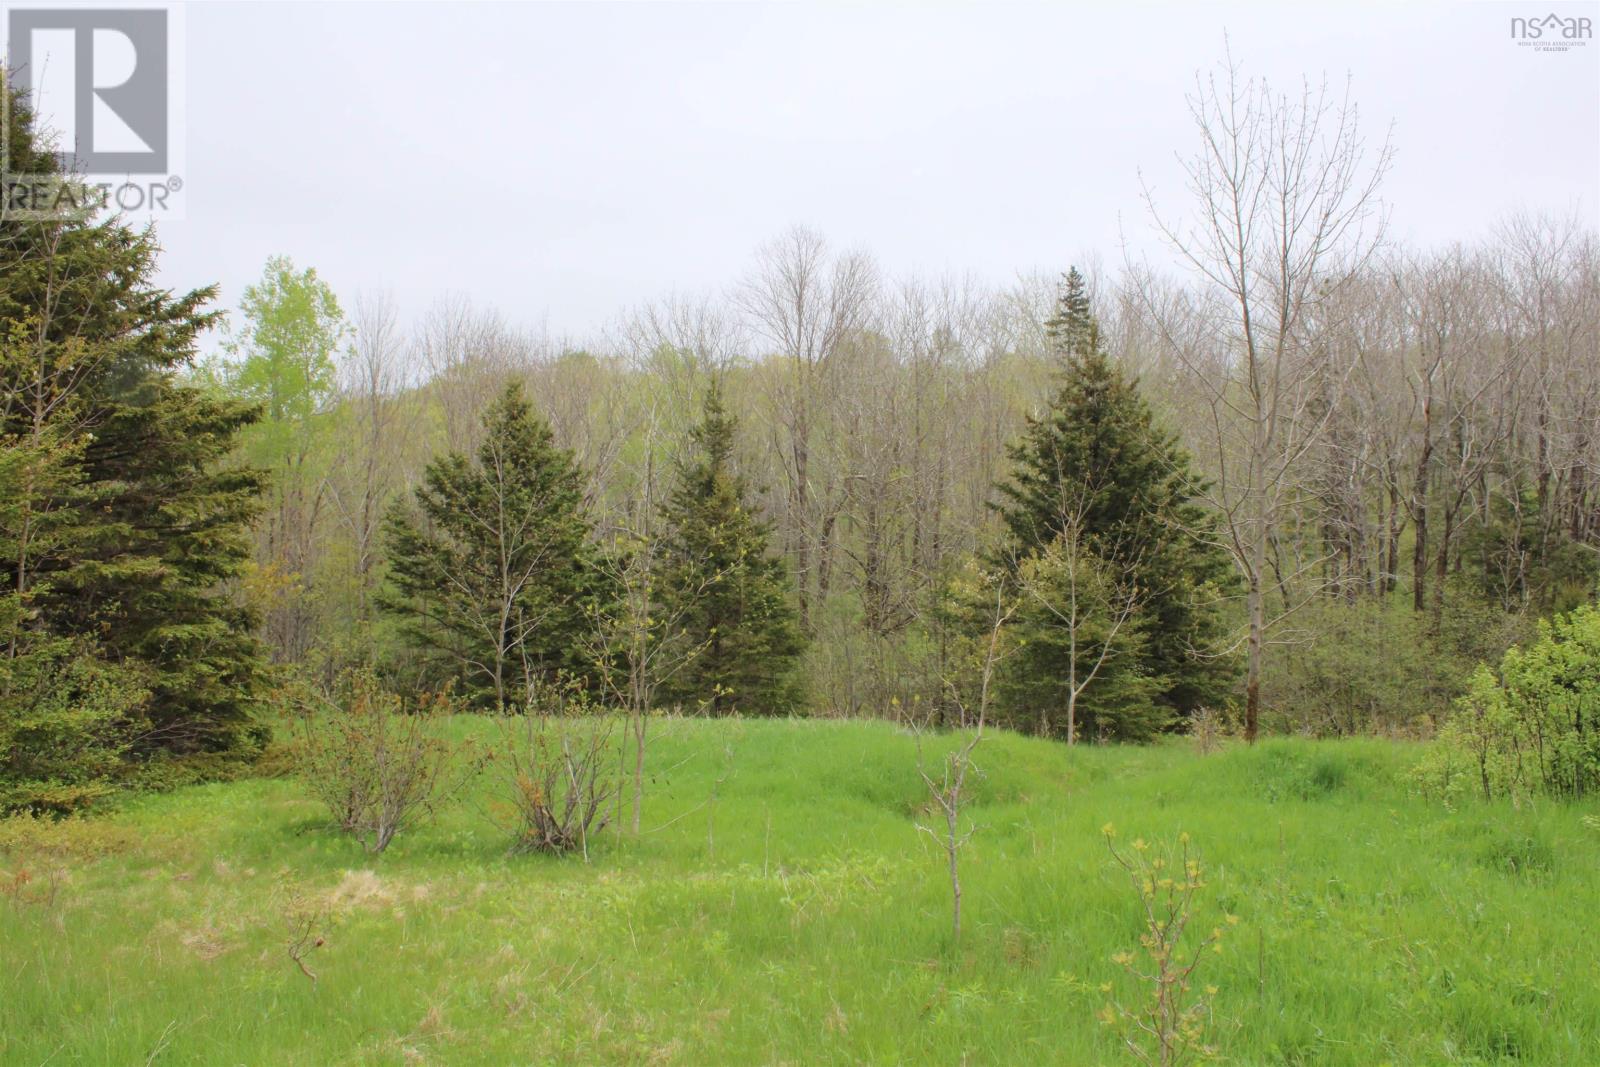 Lot 1 Shaw Road located in Clementsport, Nova Scotia